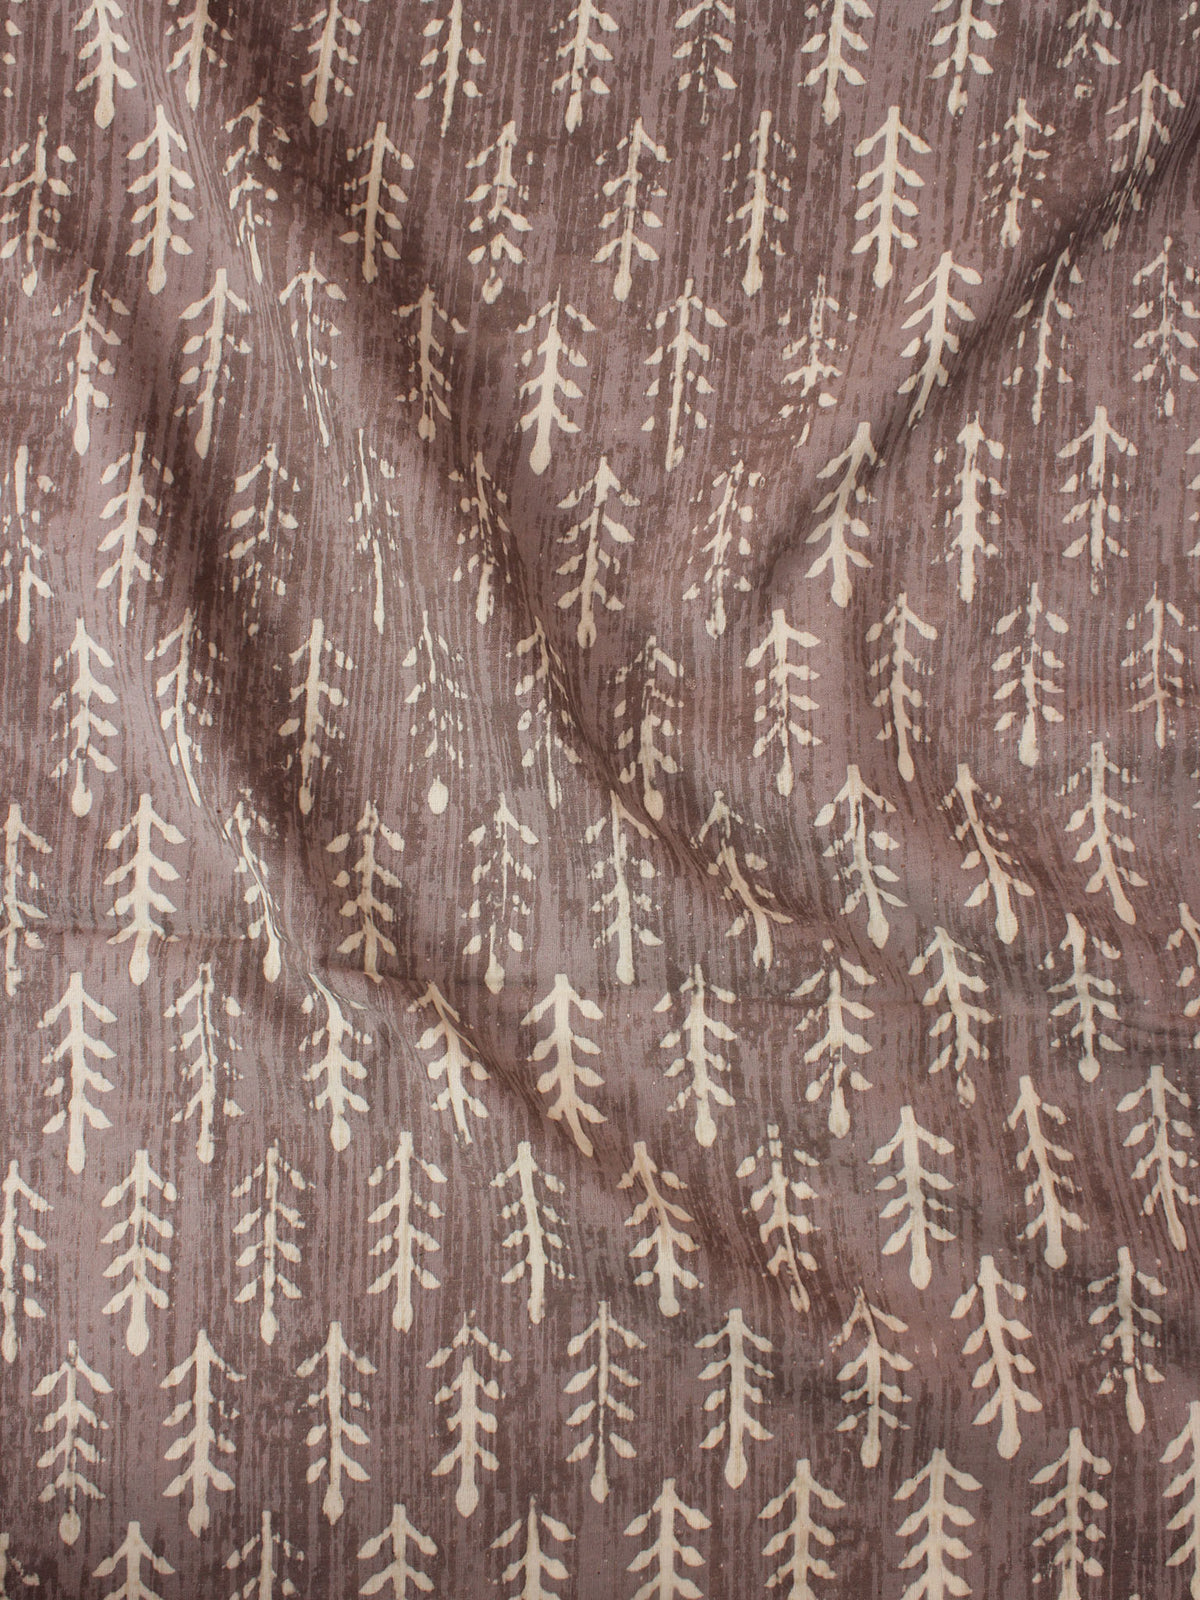 Brown Beige Natural Dyed Hand Block Printed Cotton Fabric Per Meter - F0916310